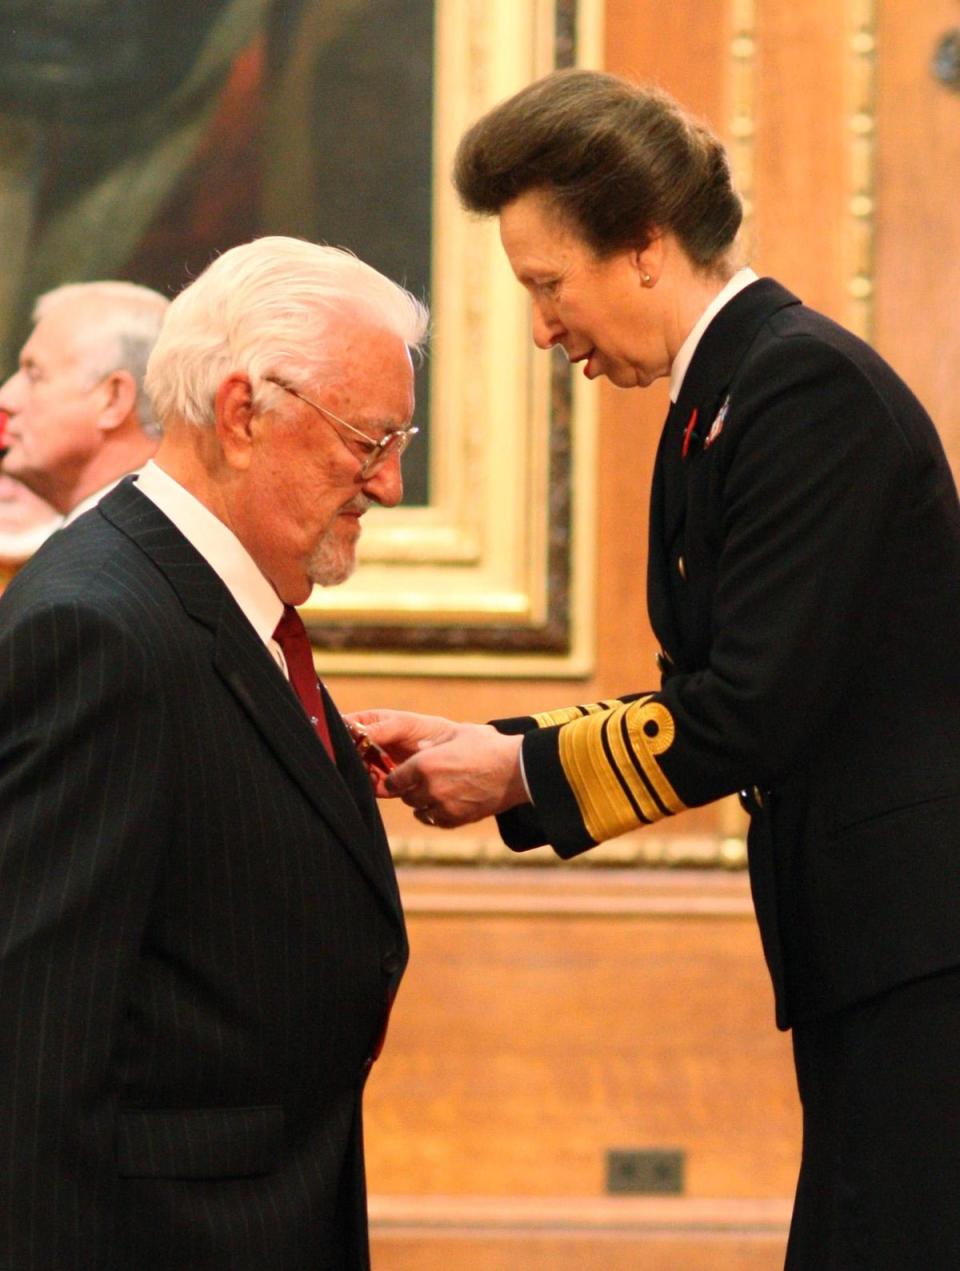 Bernard Cribbins is made an Officer of the British Empire (OBE) during an Investiture ceremony from the Princess Royal at Windsor Castle. (PA Archive)